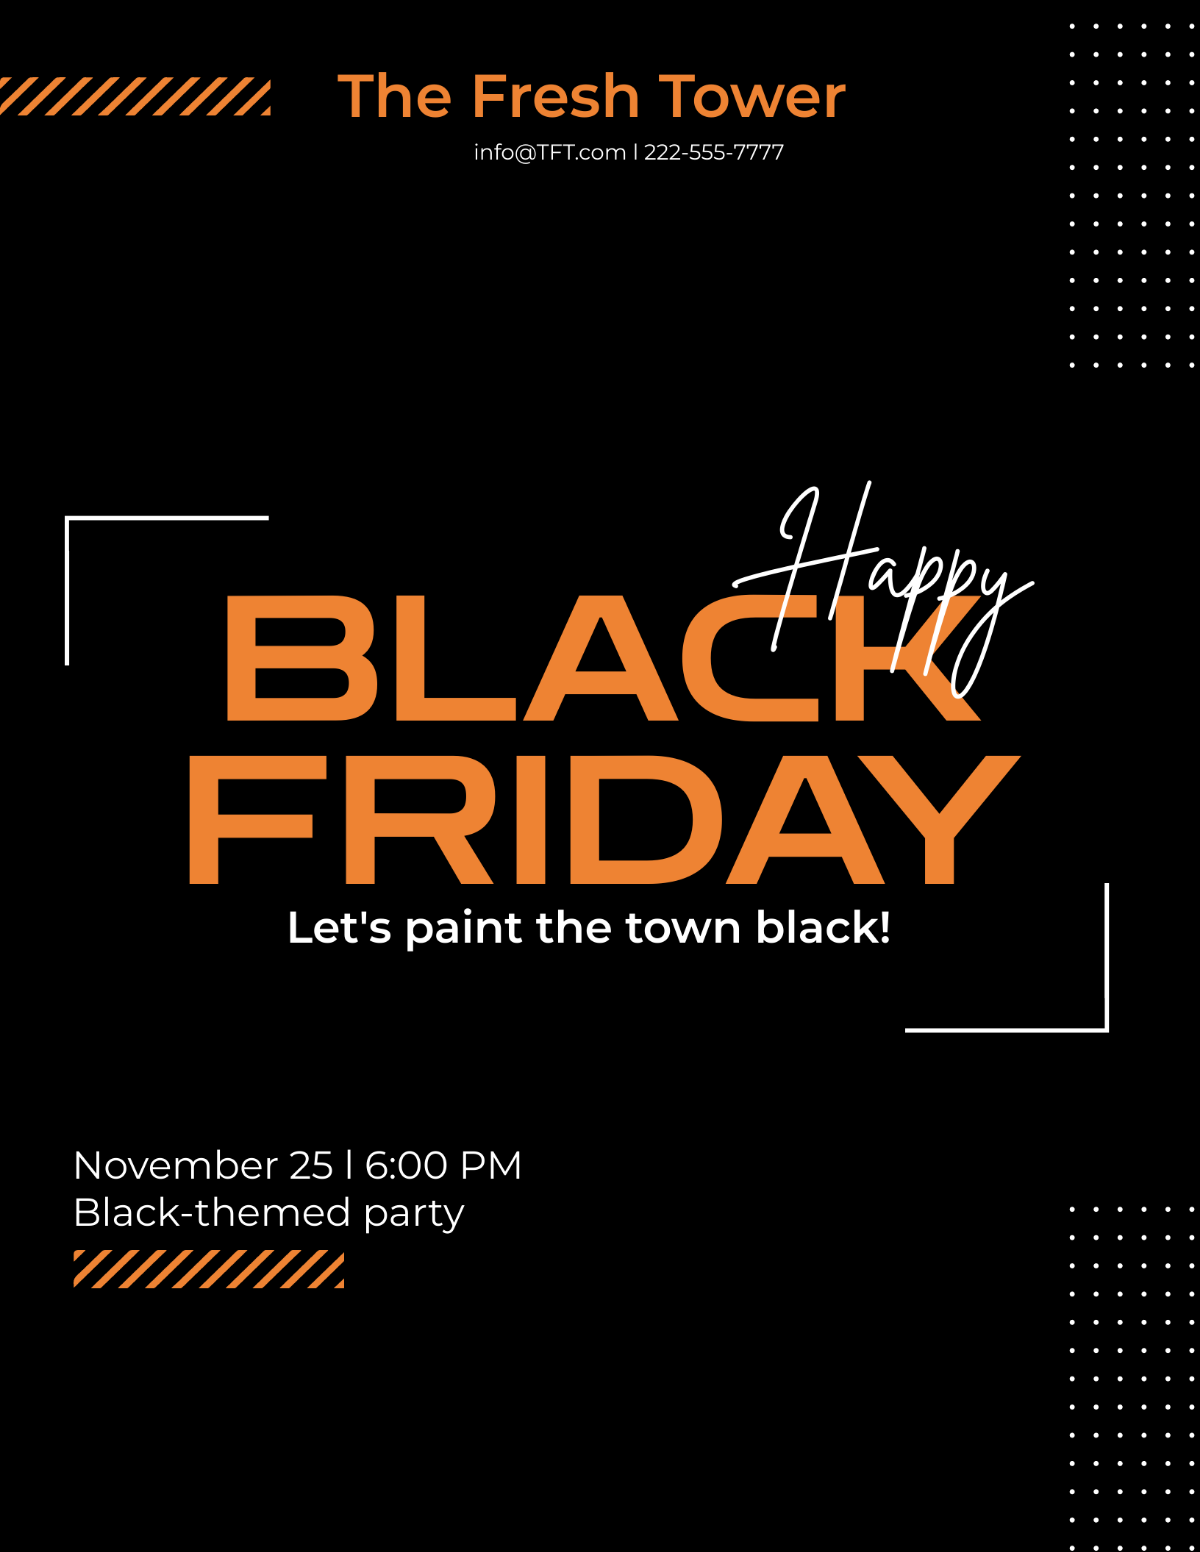 Happy Black Friday Flyer Template